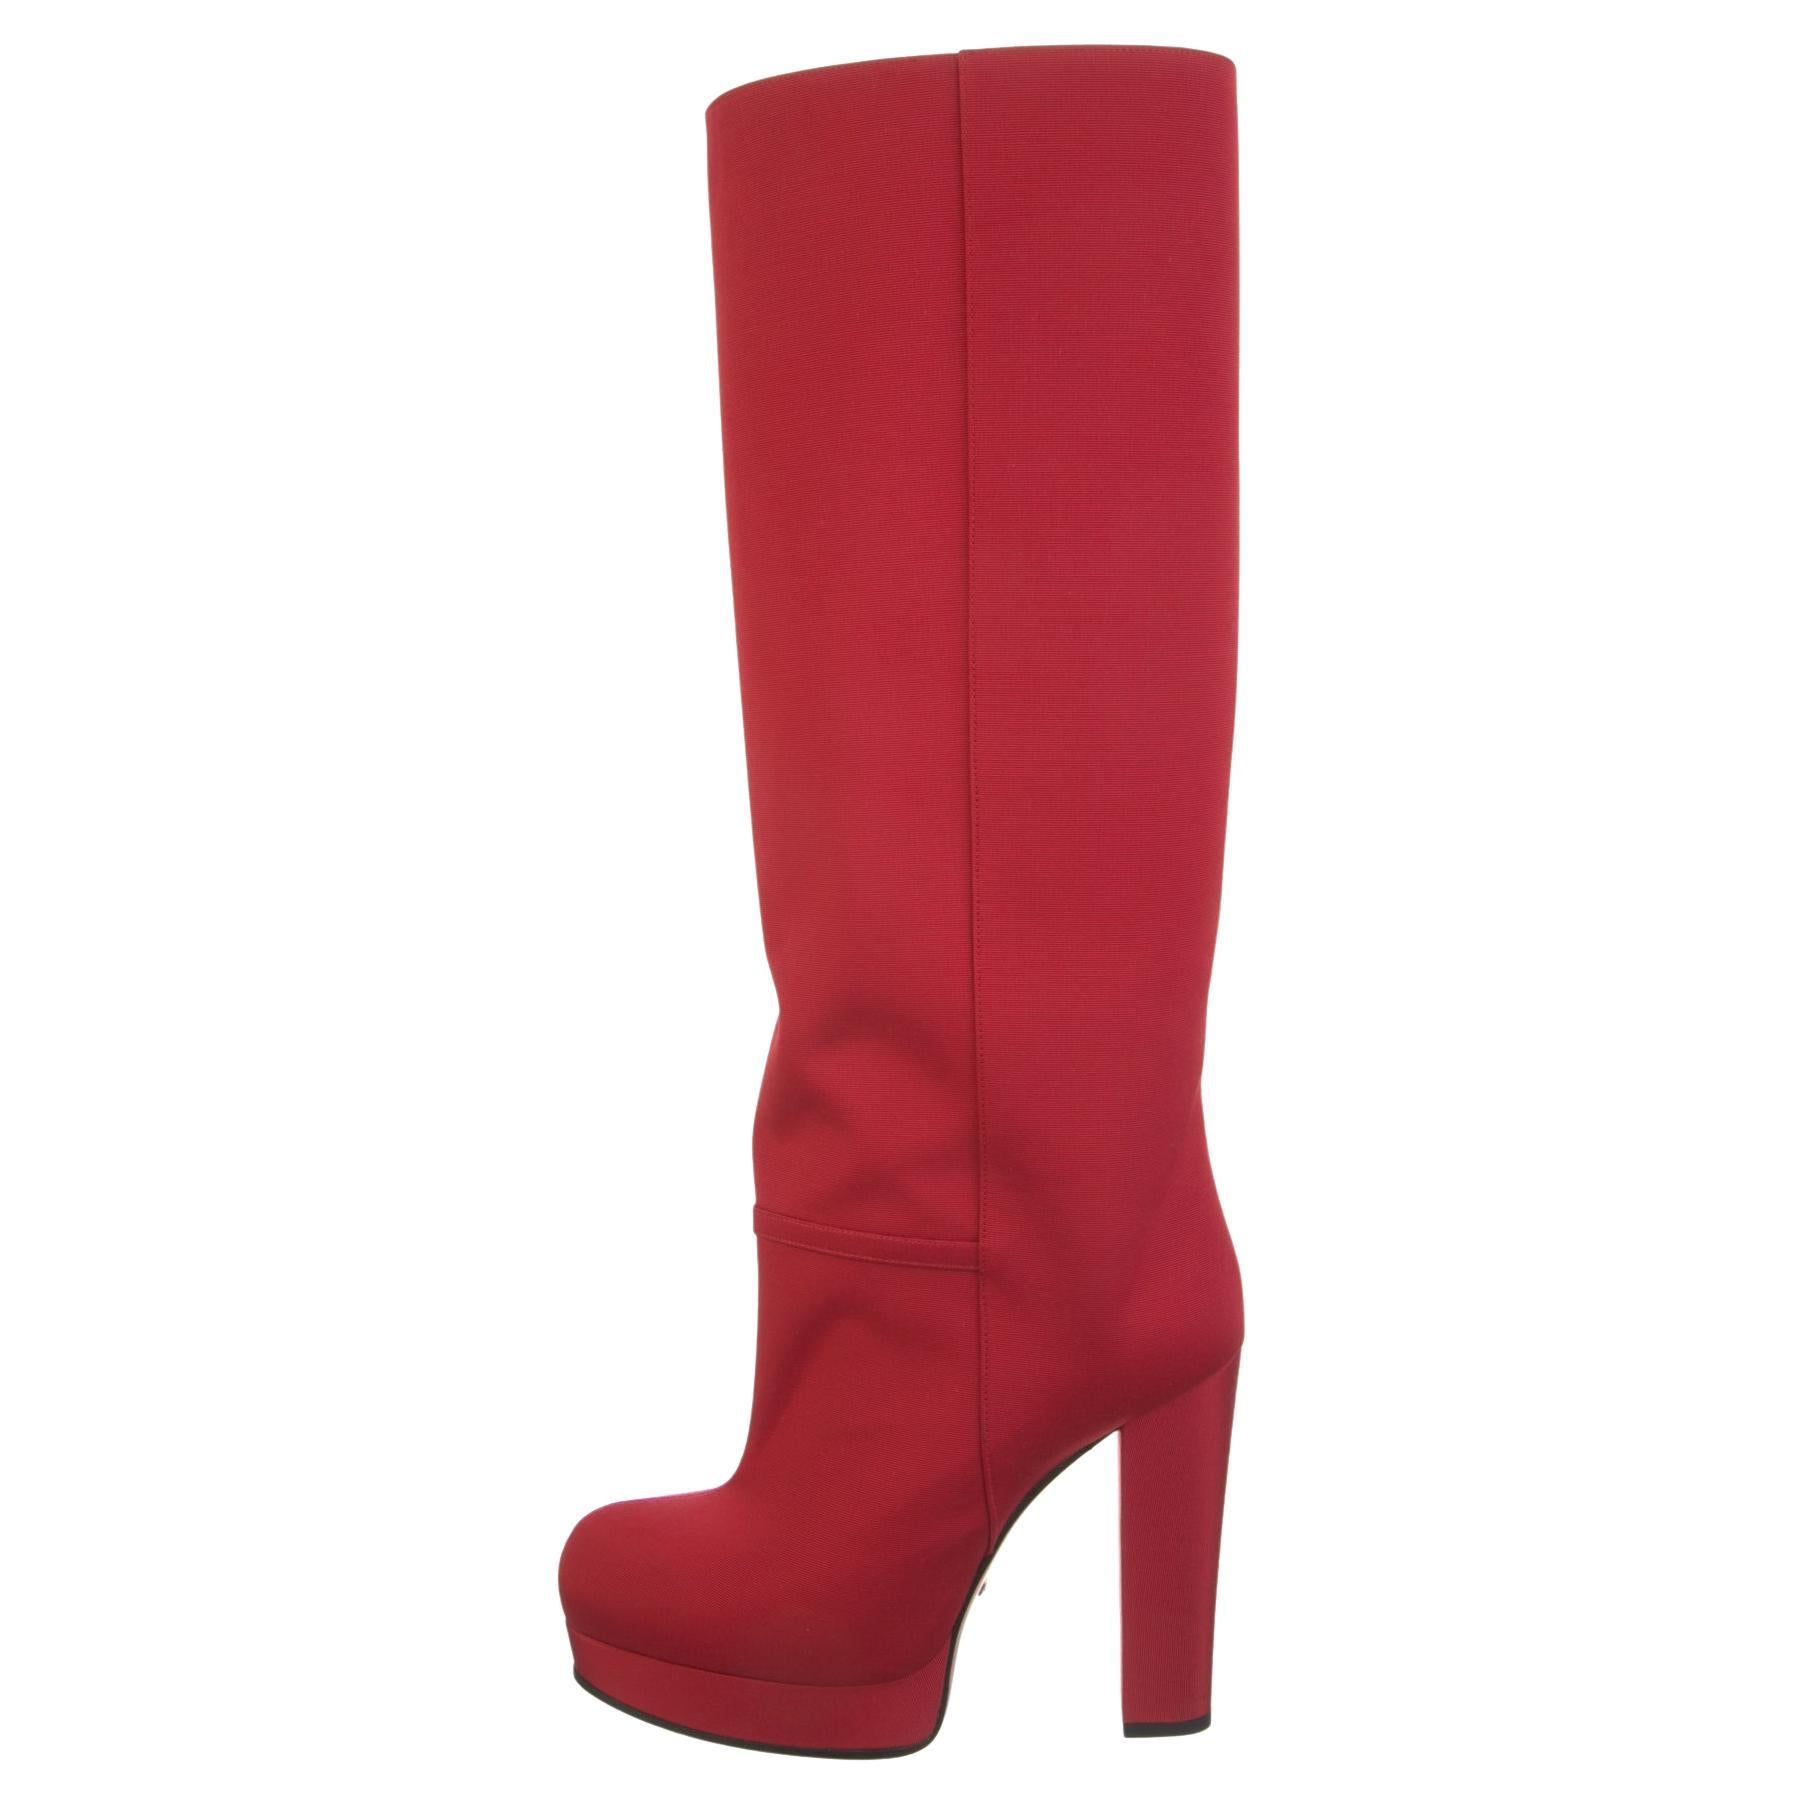 New With Box Gucci Fall 2019 Alessandro Michele Red Boots Sz 38 In New Condition For Sale In Leesburg, VA